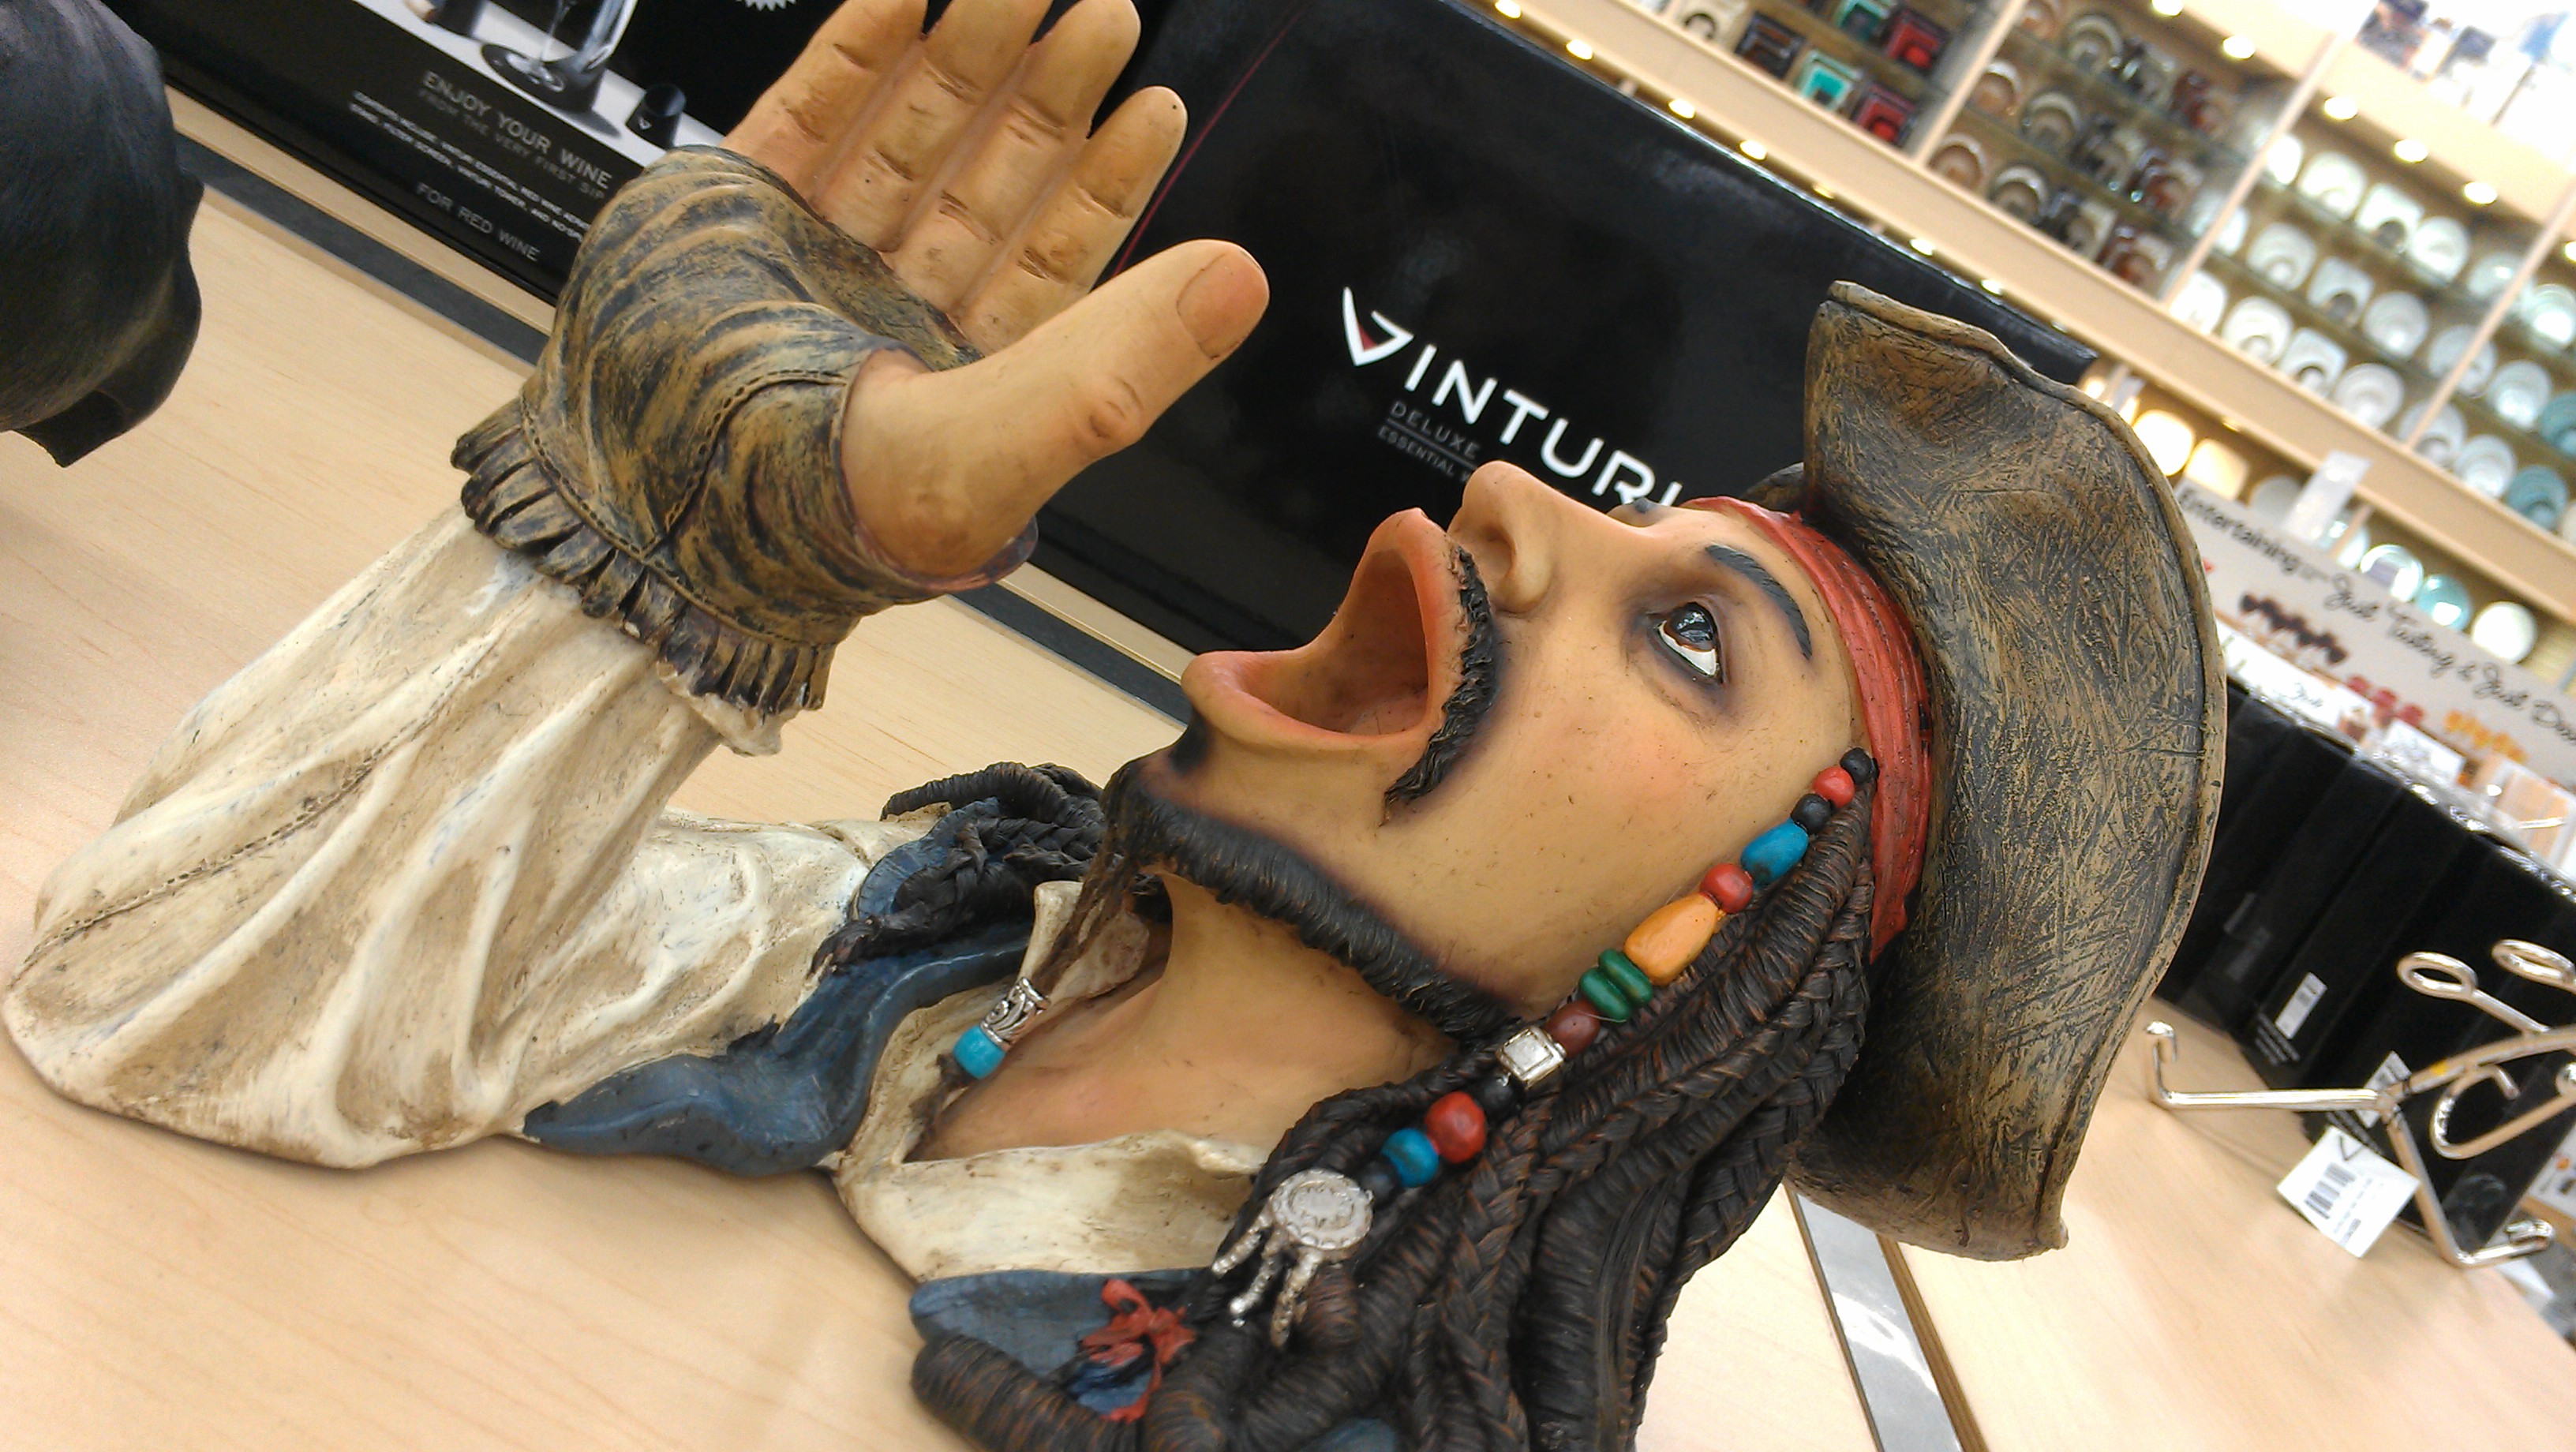 Screams for the photoshop...wonder if Capt Jack is really a butt pirate?